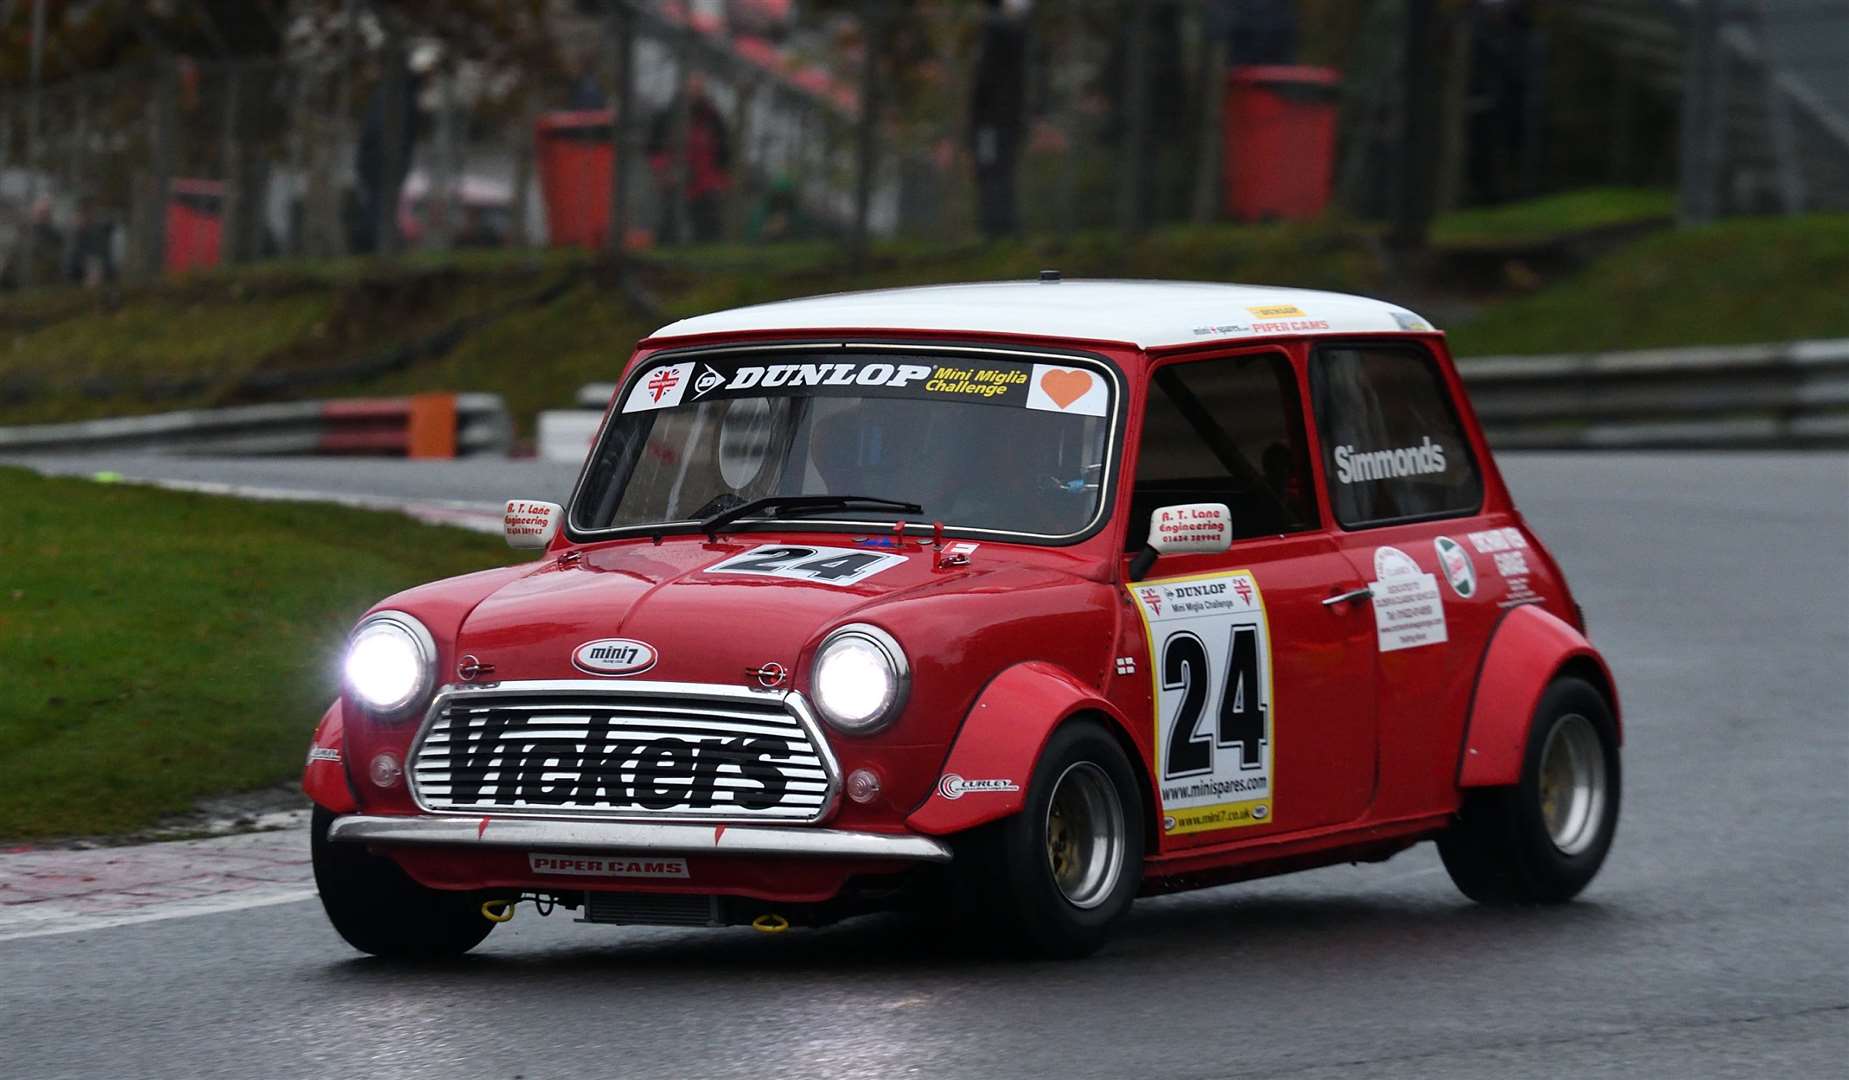 Edward Simmonds, from Tonbridge, grabbed a best result of sixth overall in the Dunlop Mini Winter Challenge